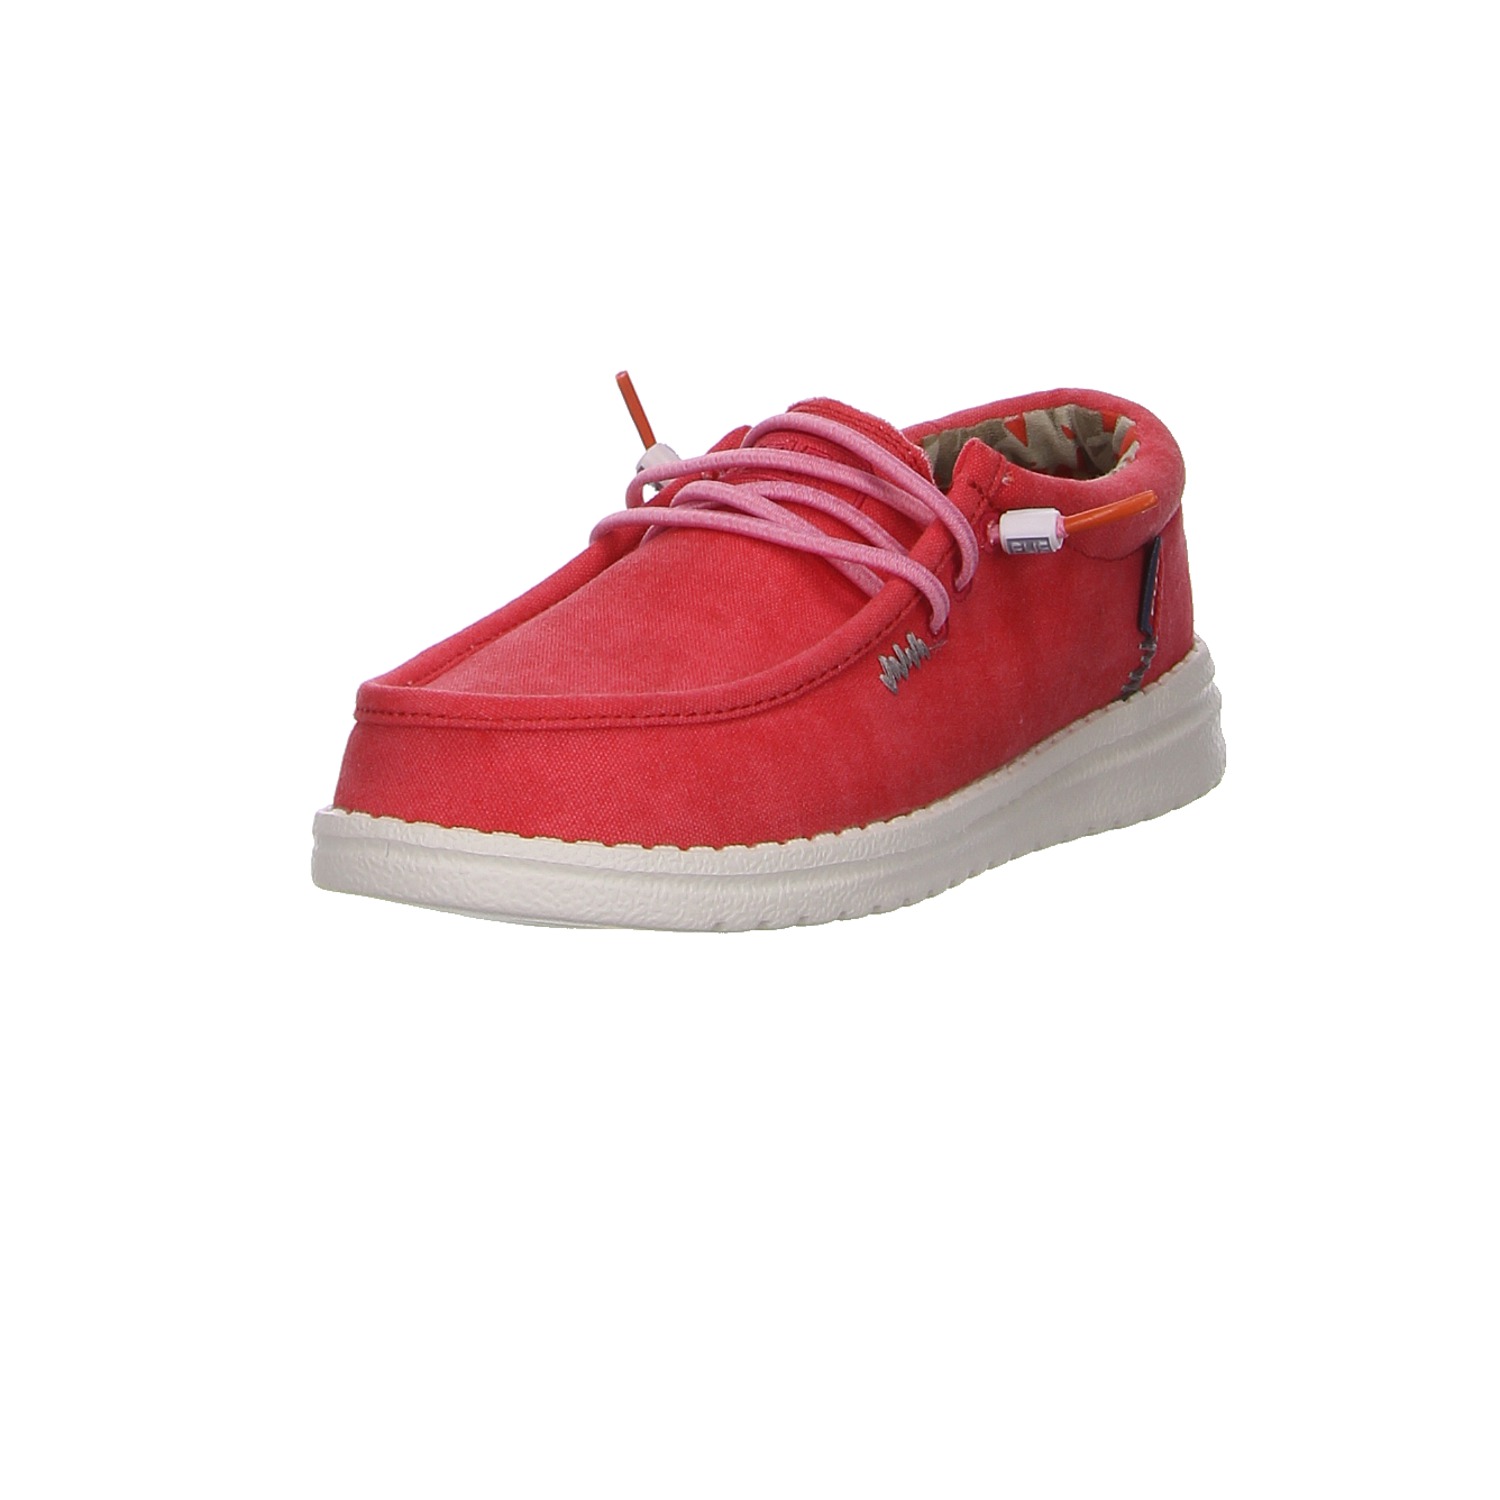 Fusion Sneaker Emma washed chilli